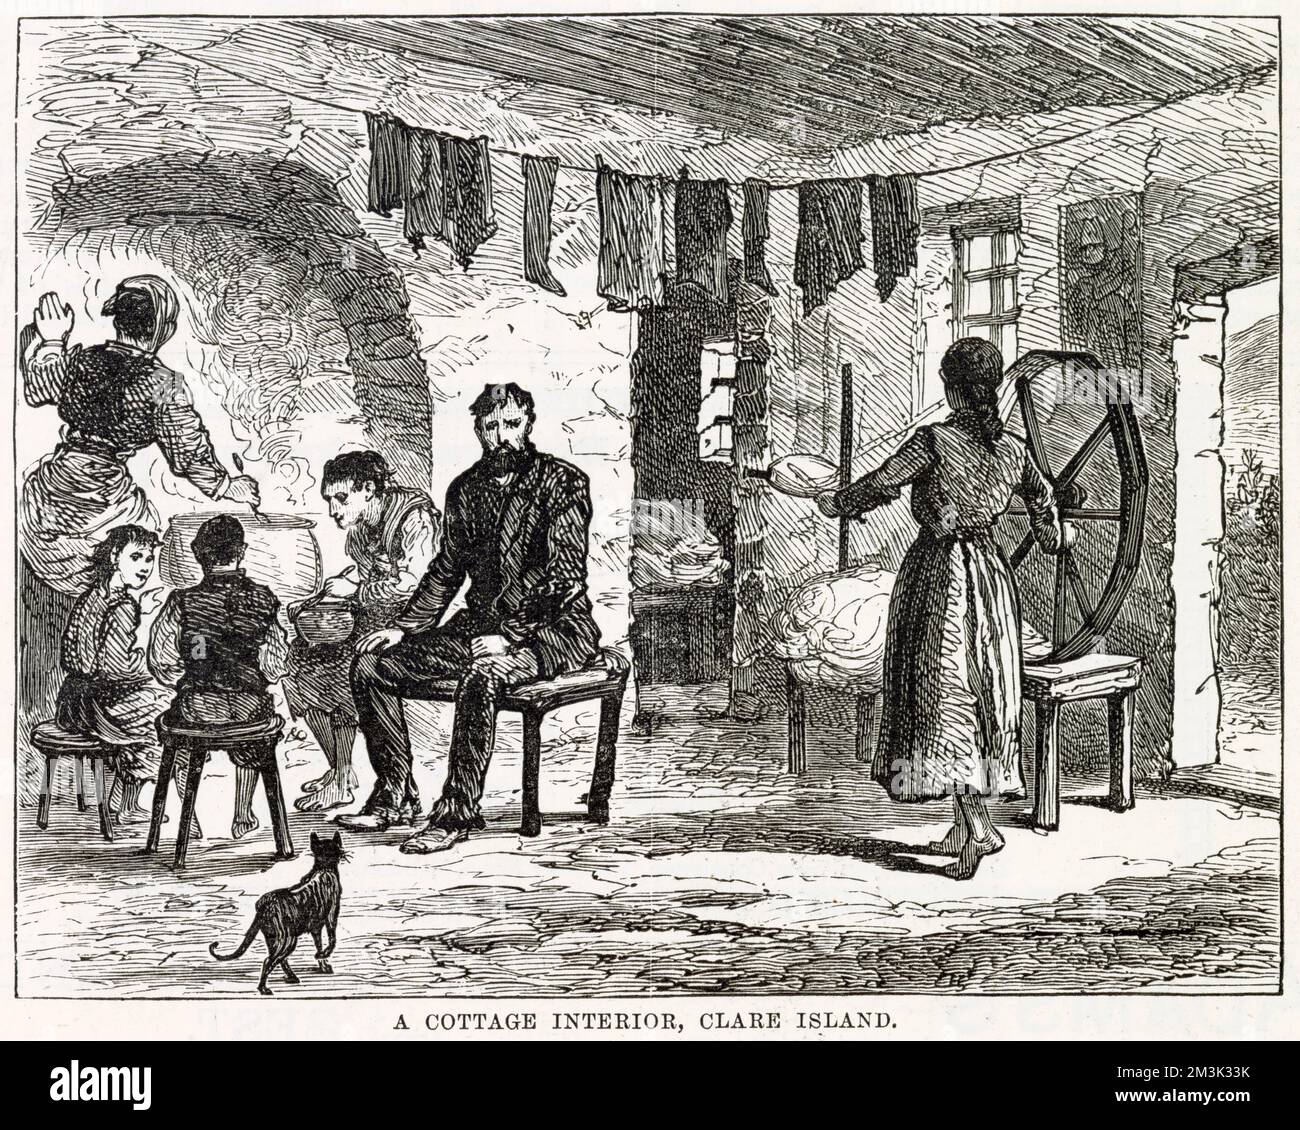 A family scene in a crowded and cramped cottage interior with laundry on a washing line and a cat included. A lady spins yarn near the door, another stirs a pot at the fireplace while the rest of the family sit near her. Miserable conditions were brought on by the potato famine in the mid 19th century in Clare Island, west of Ireland. Stock Photo